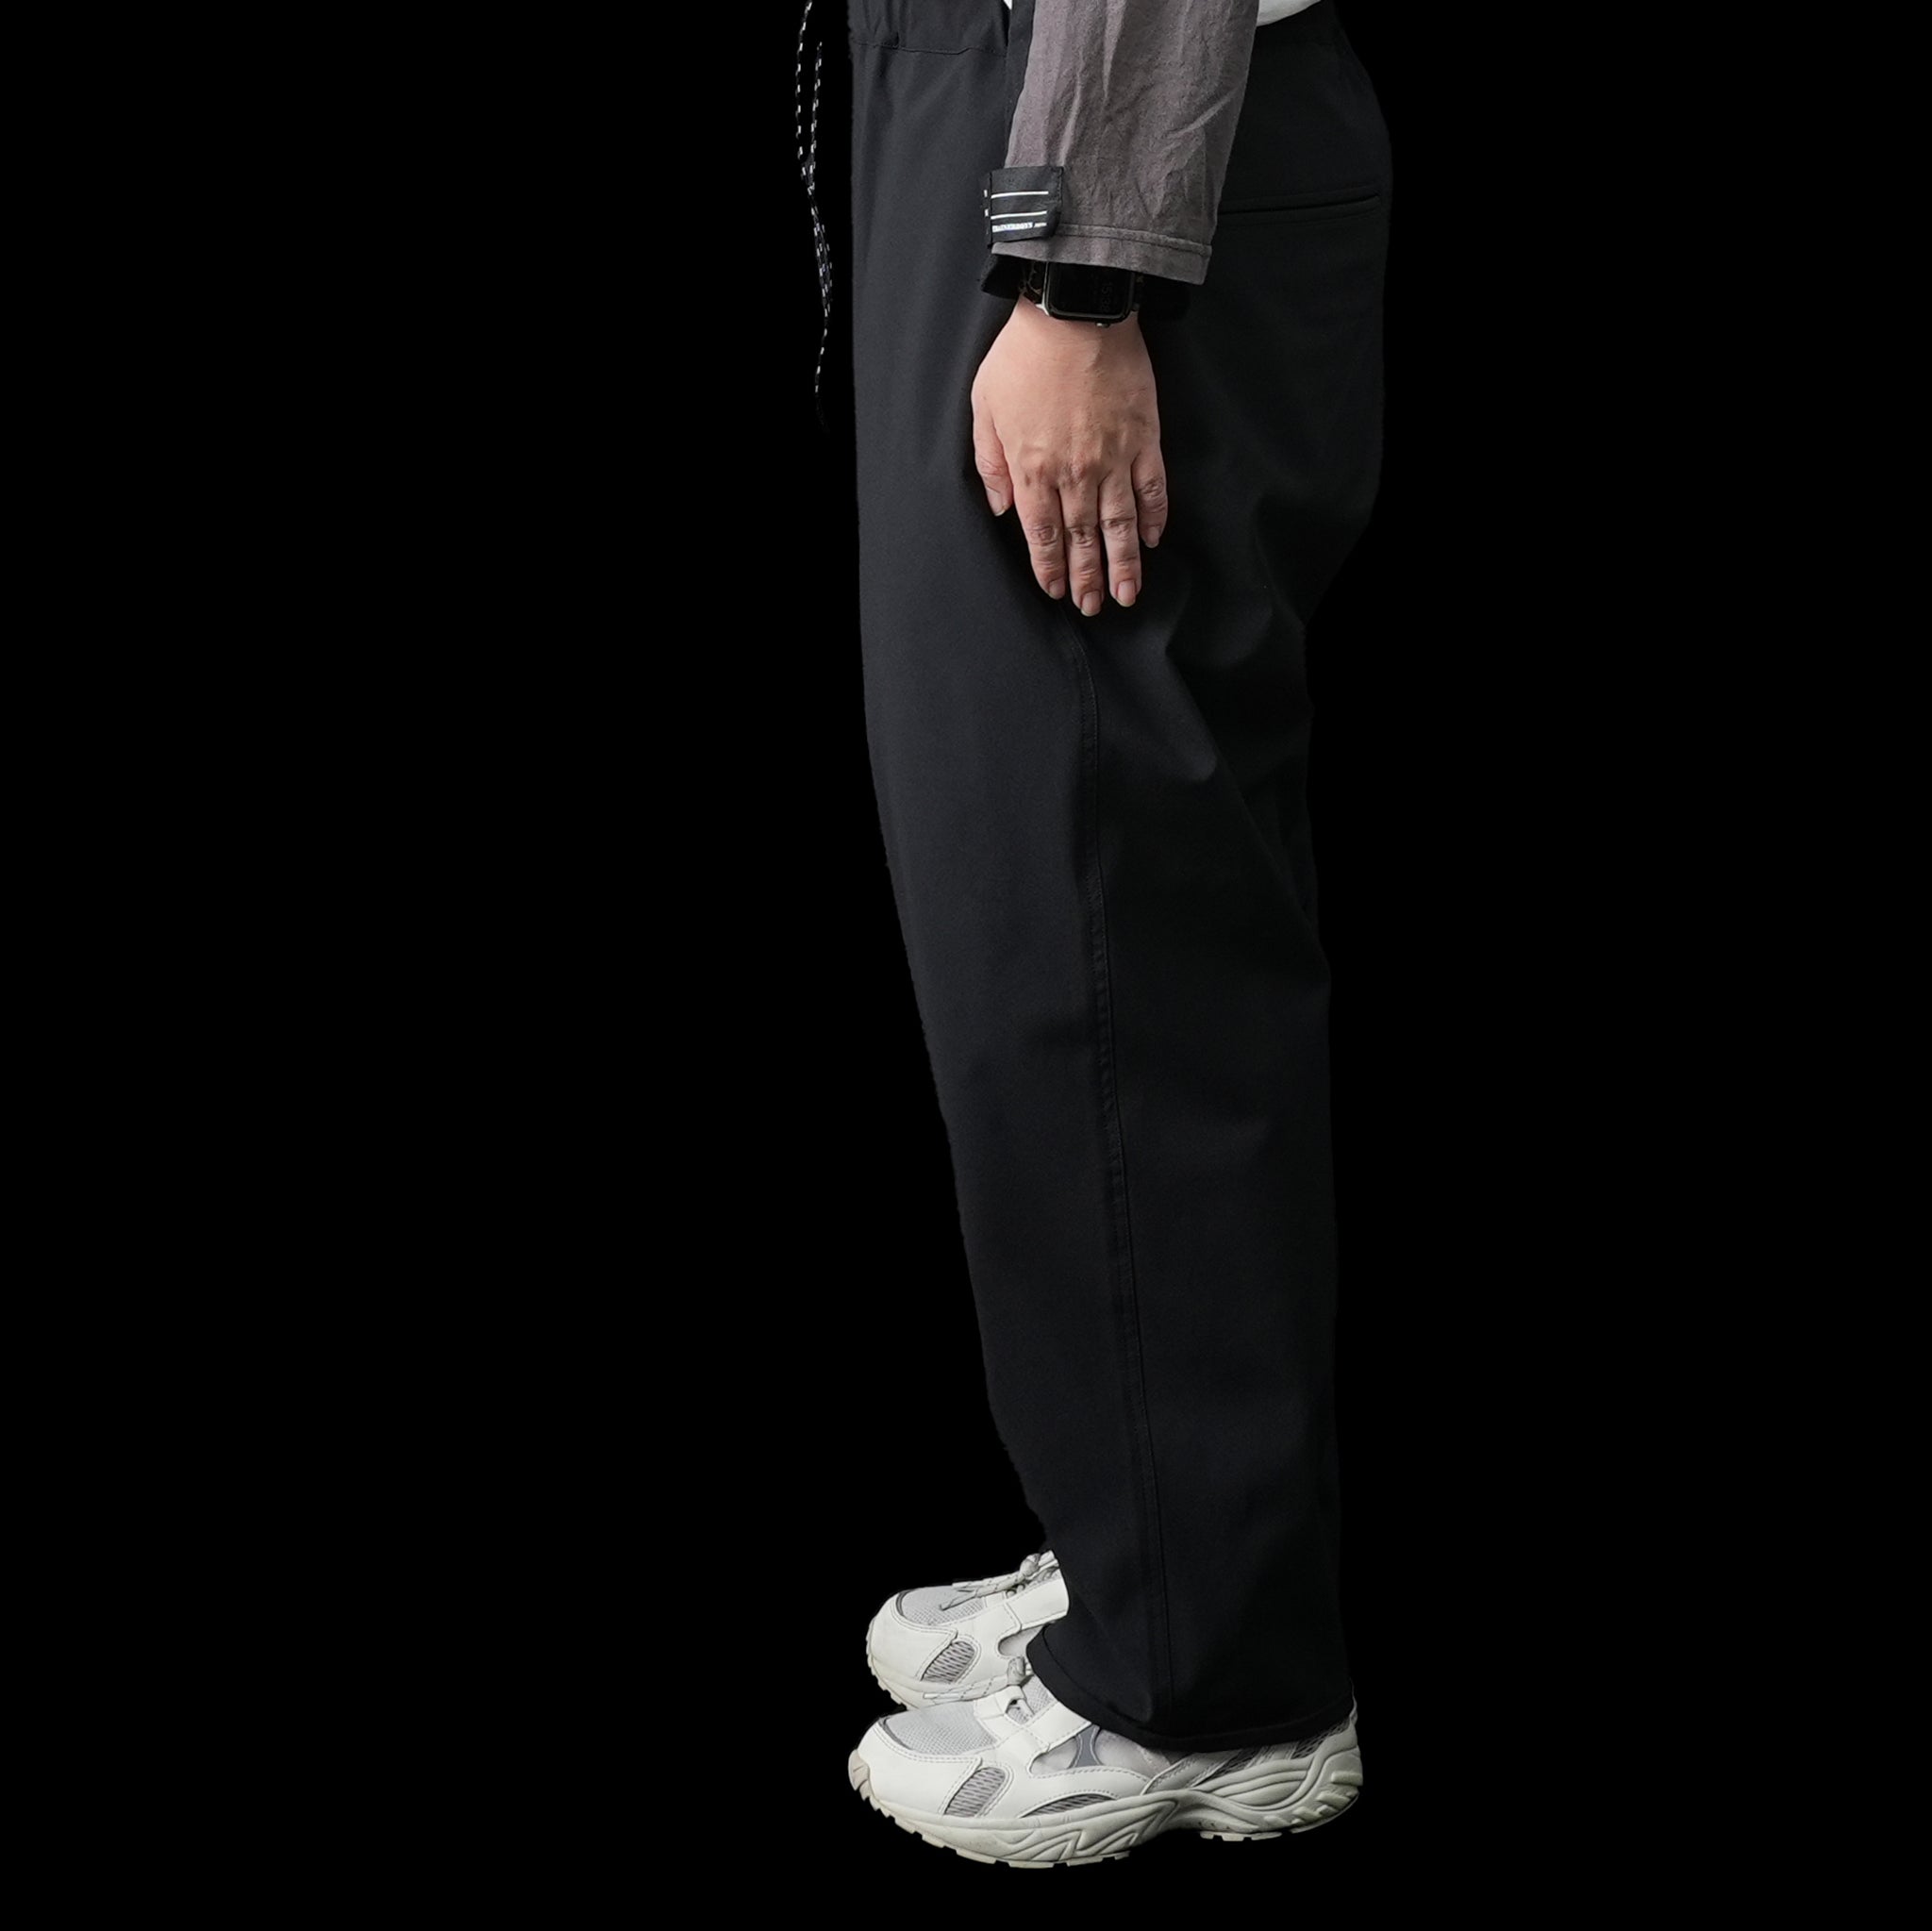 No:PH24FW-001_Black | Name:P.H. M.EASY PANTS | Color:Black【POWDERHORN MOUNTAINEERING_パウダーホーンマウンテニアリング】【入荷予定アイテム・入荷連絡可能】